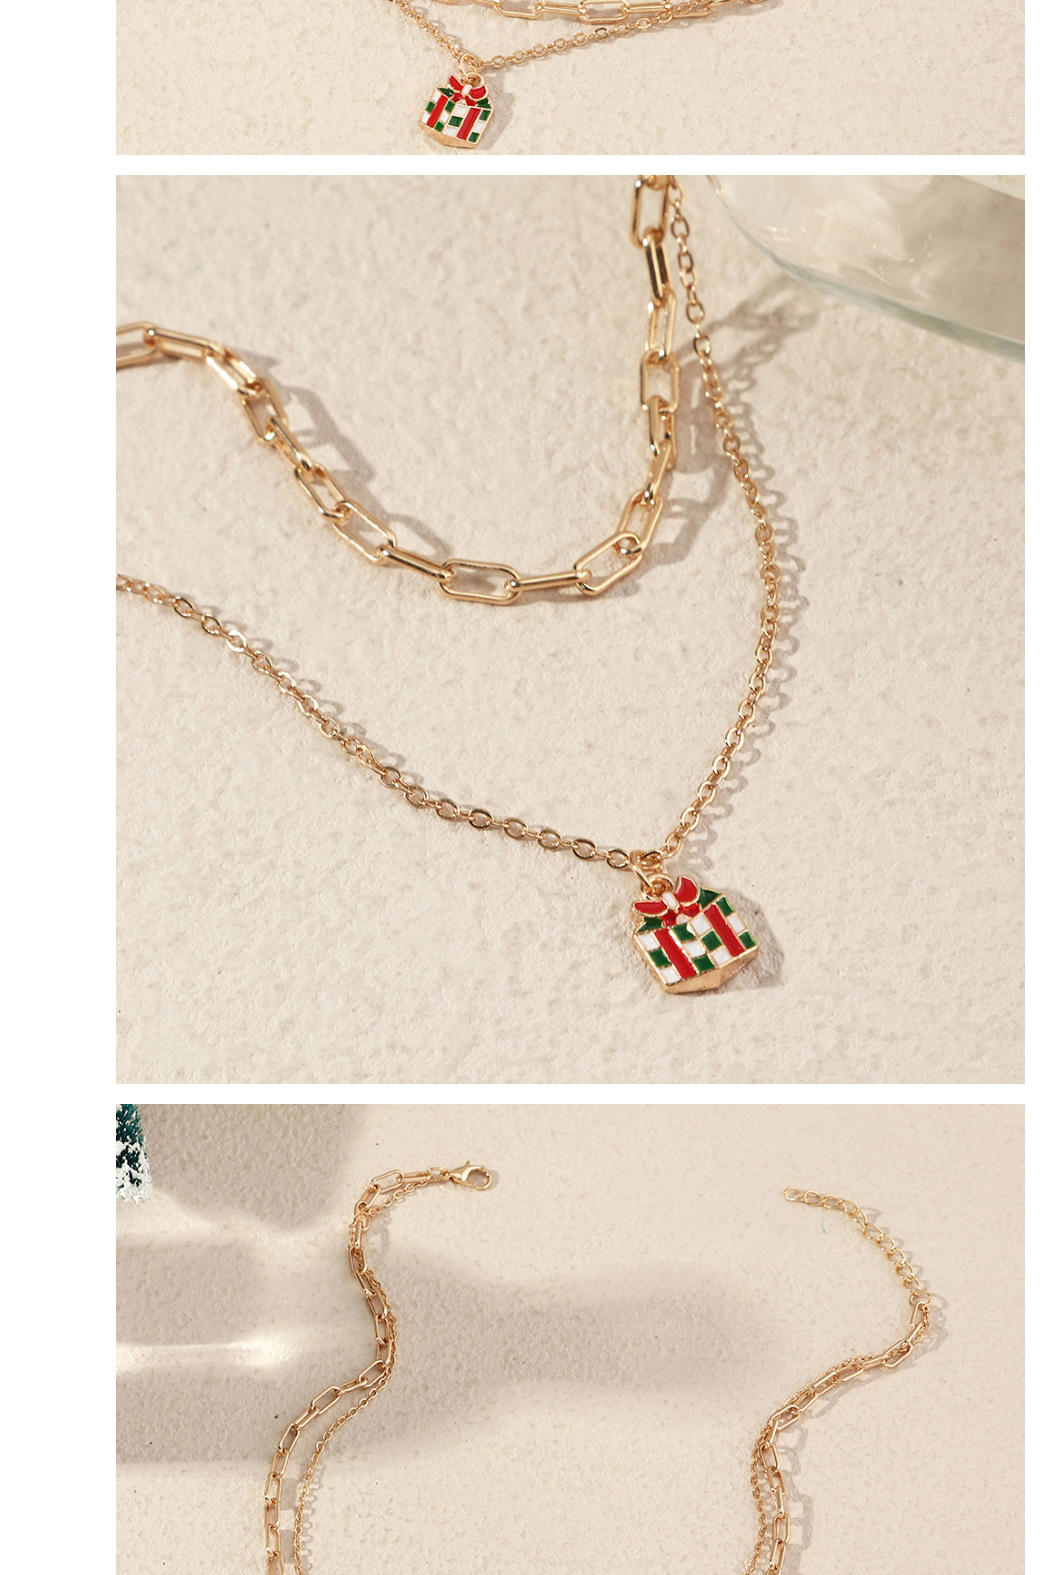 Fashion Snowflake Alloy Dripping Bell Snowflake Christmas Double Necklace,Multi Strand Necklaces